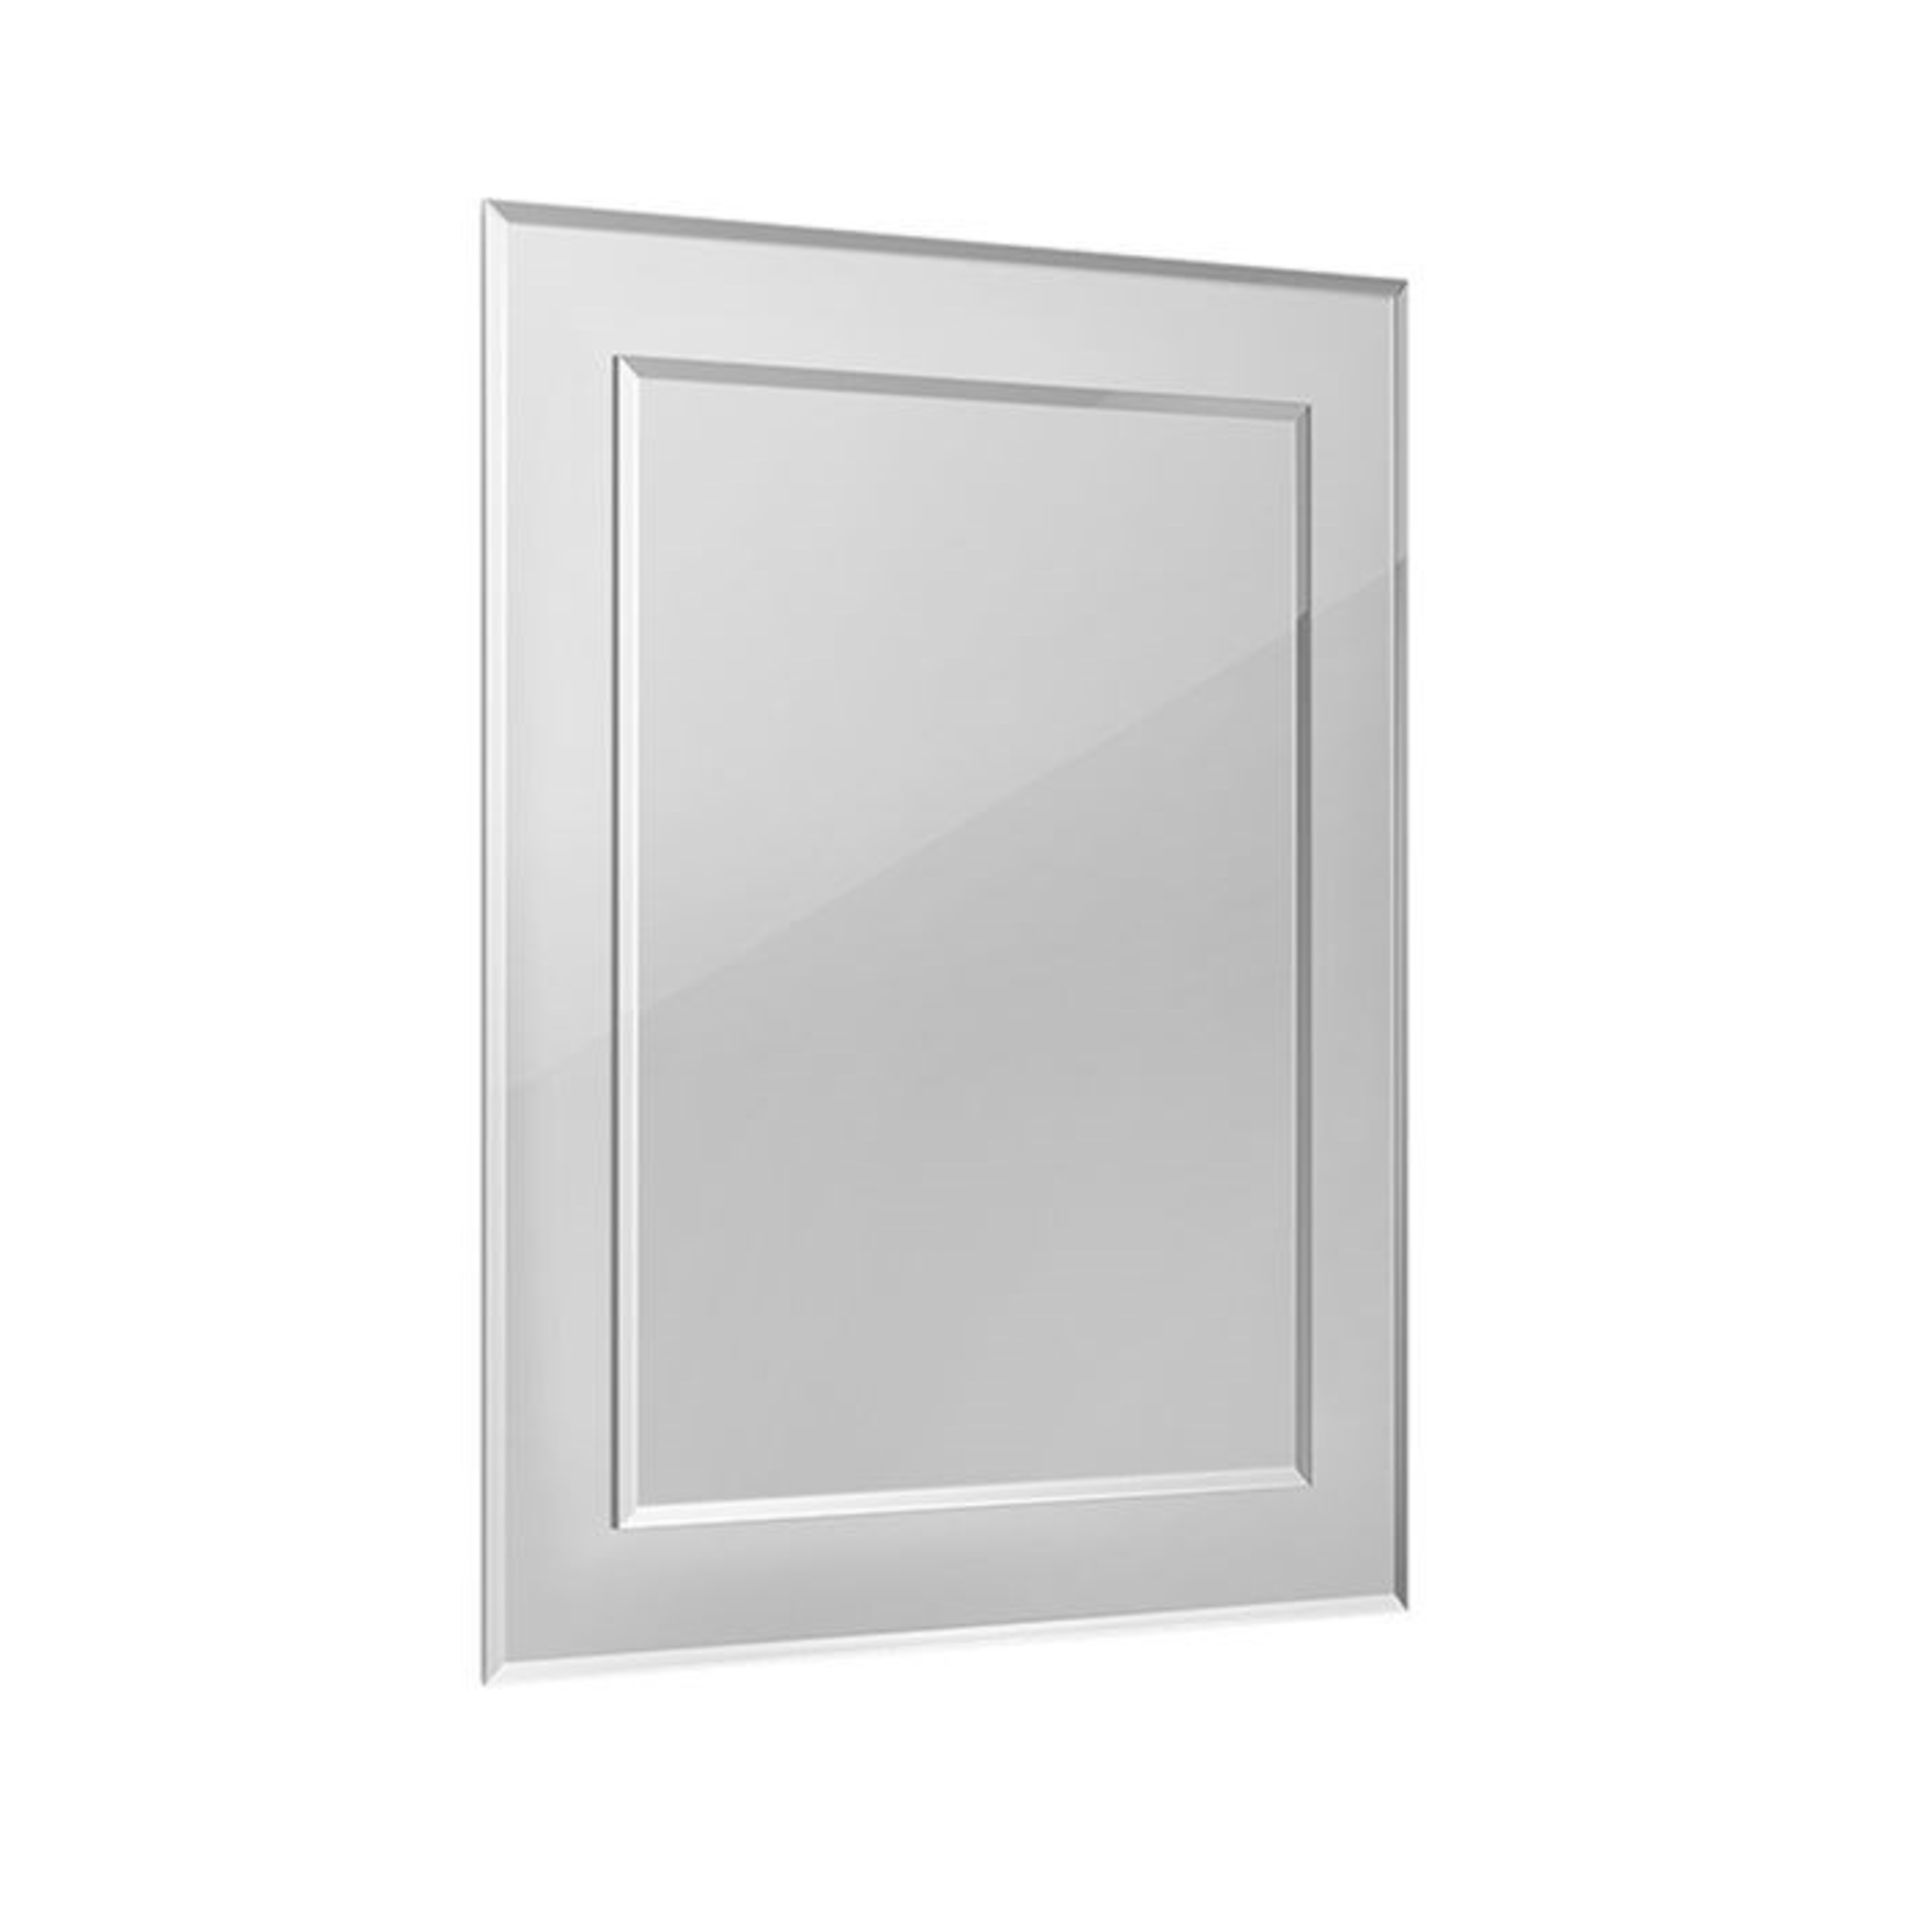 400x500mm Bevel Mirror. Smooth beveled edge for additional safety Supplied fully assembled for ...